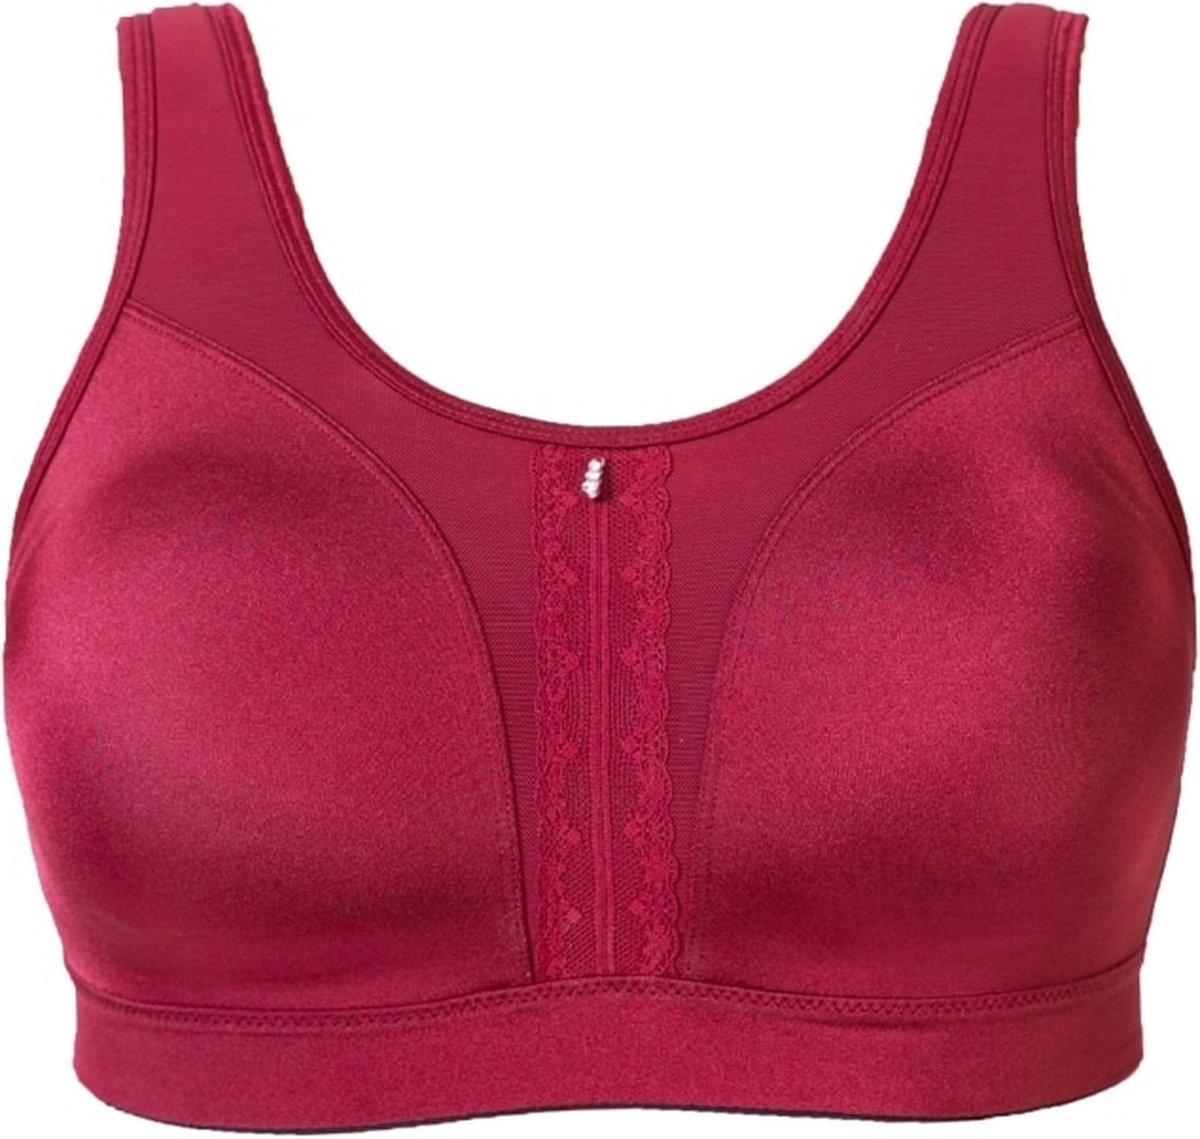 High impact Sport BH (zonder beugel) Cannes, Deep Red / Bordeaux rood, maat: 75C